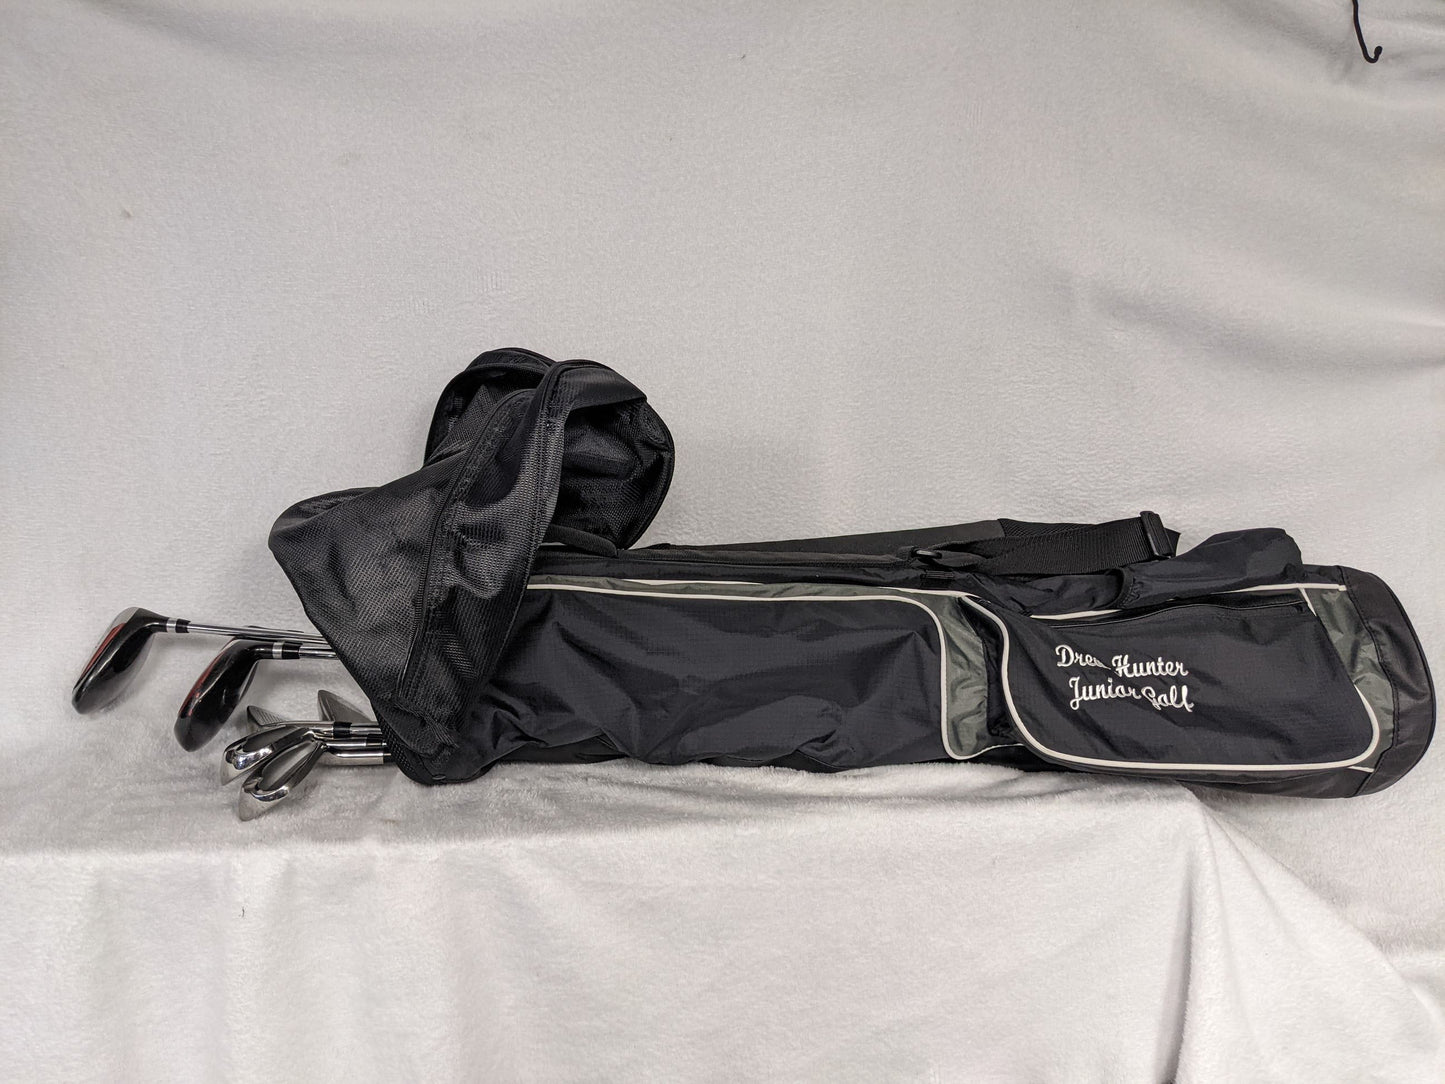 Nike Junior Golf Bag with Assorted Top Flight Clubs Right Hand Golf Set Size 7 Clubs (No Putter) and Bag w/Shoulder Strap and Cover Color Black Condition Used